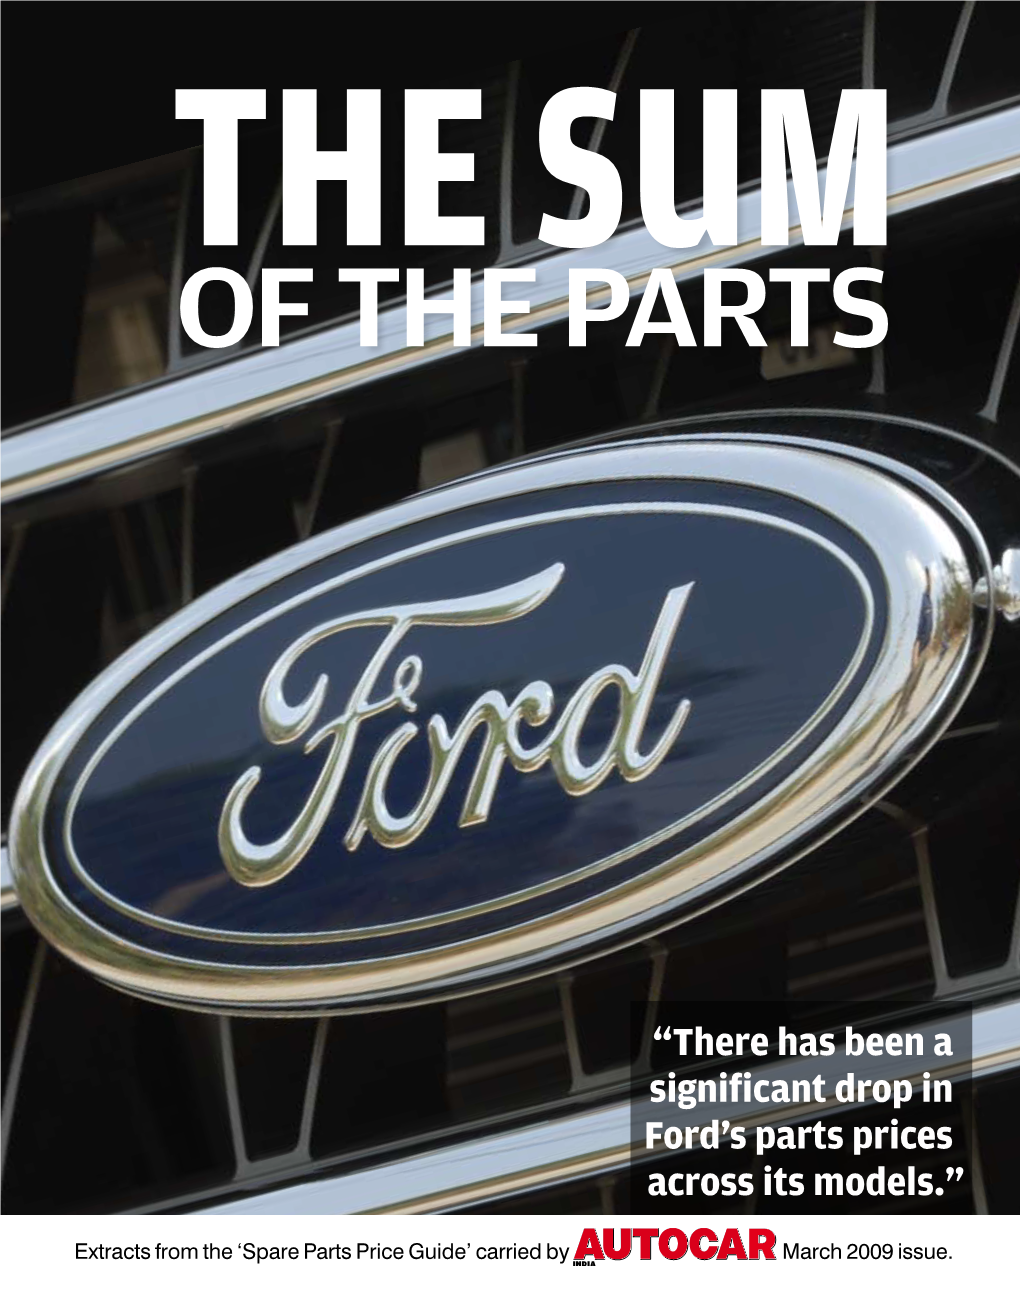 “There Has Been a Significant Drop in Ford's Parts Prices Across Its Models.”